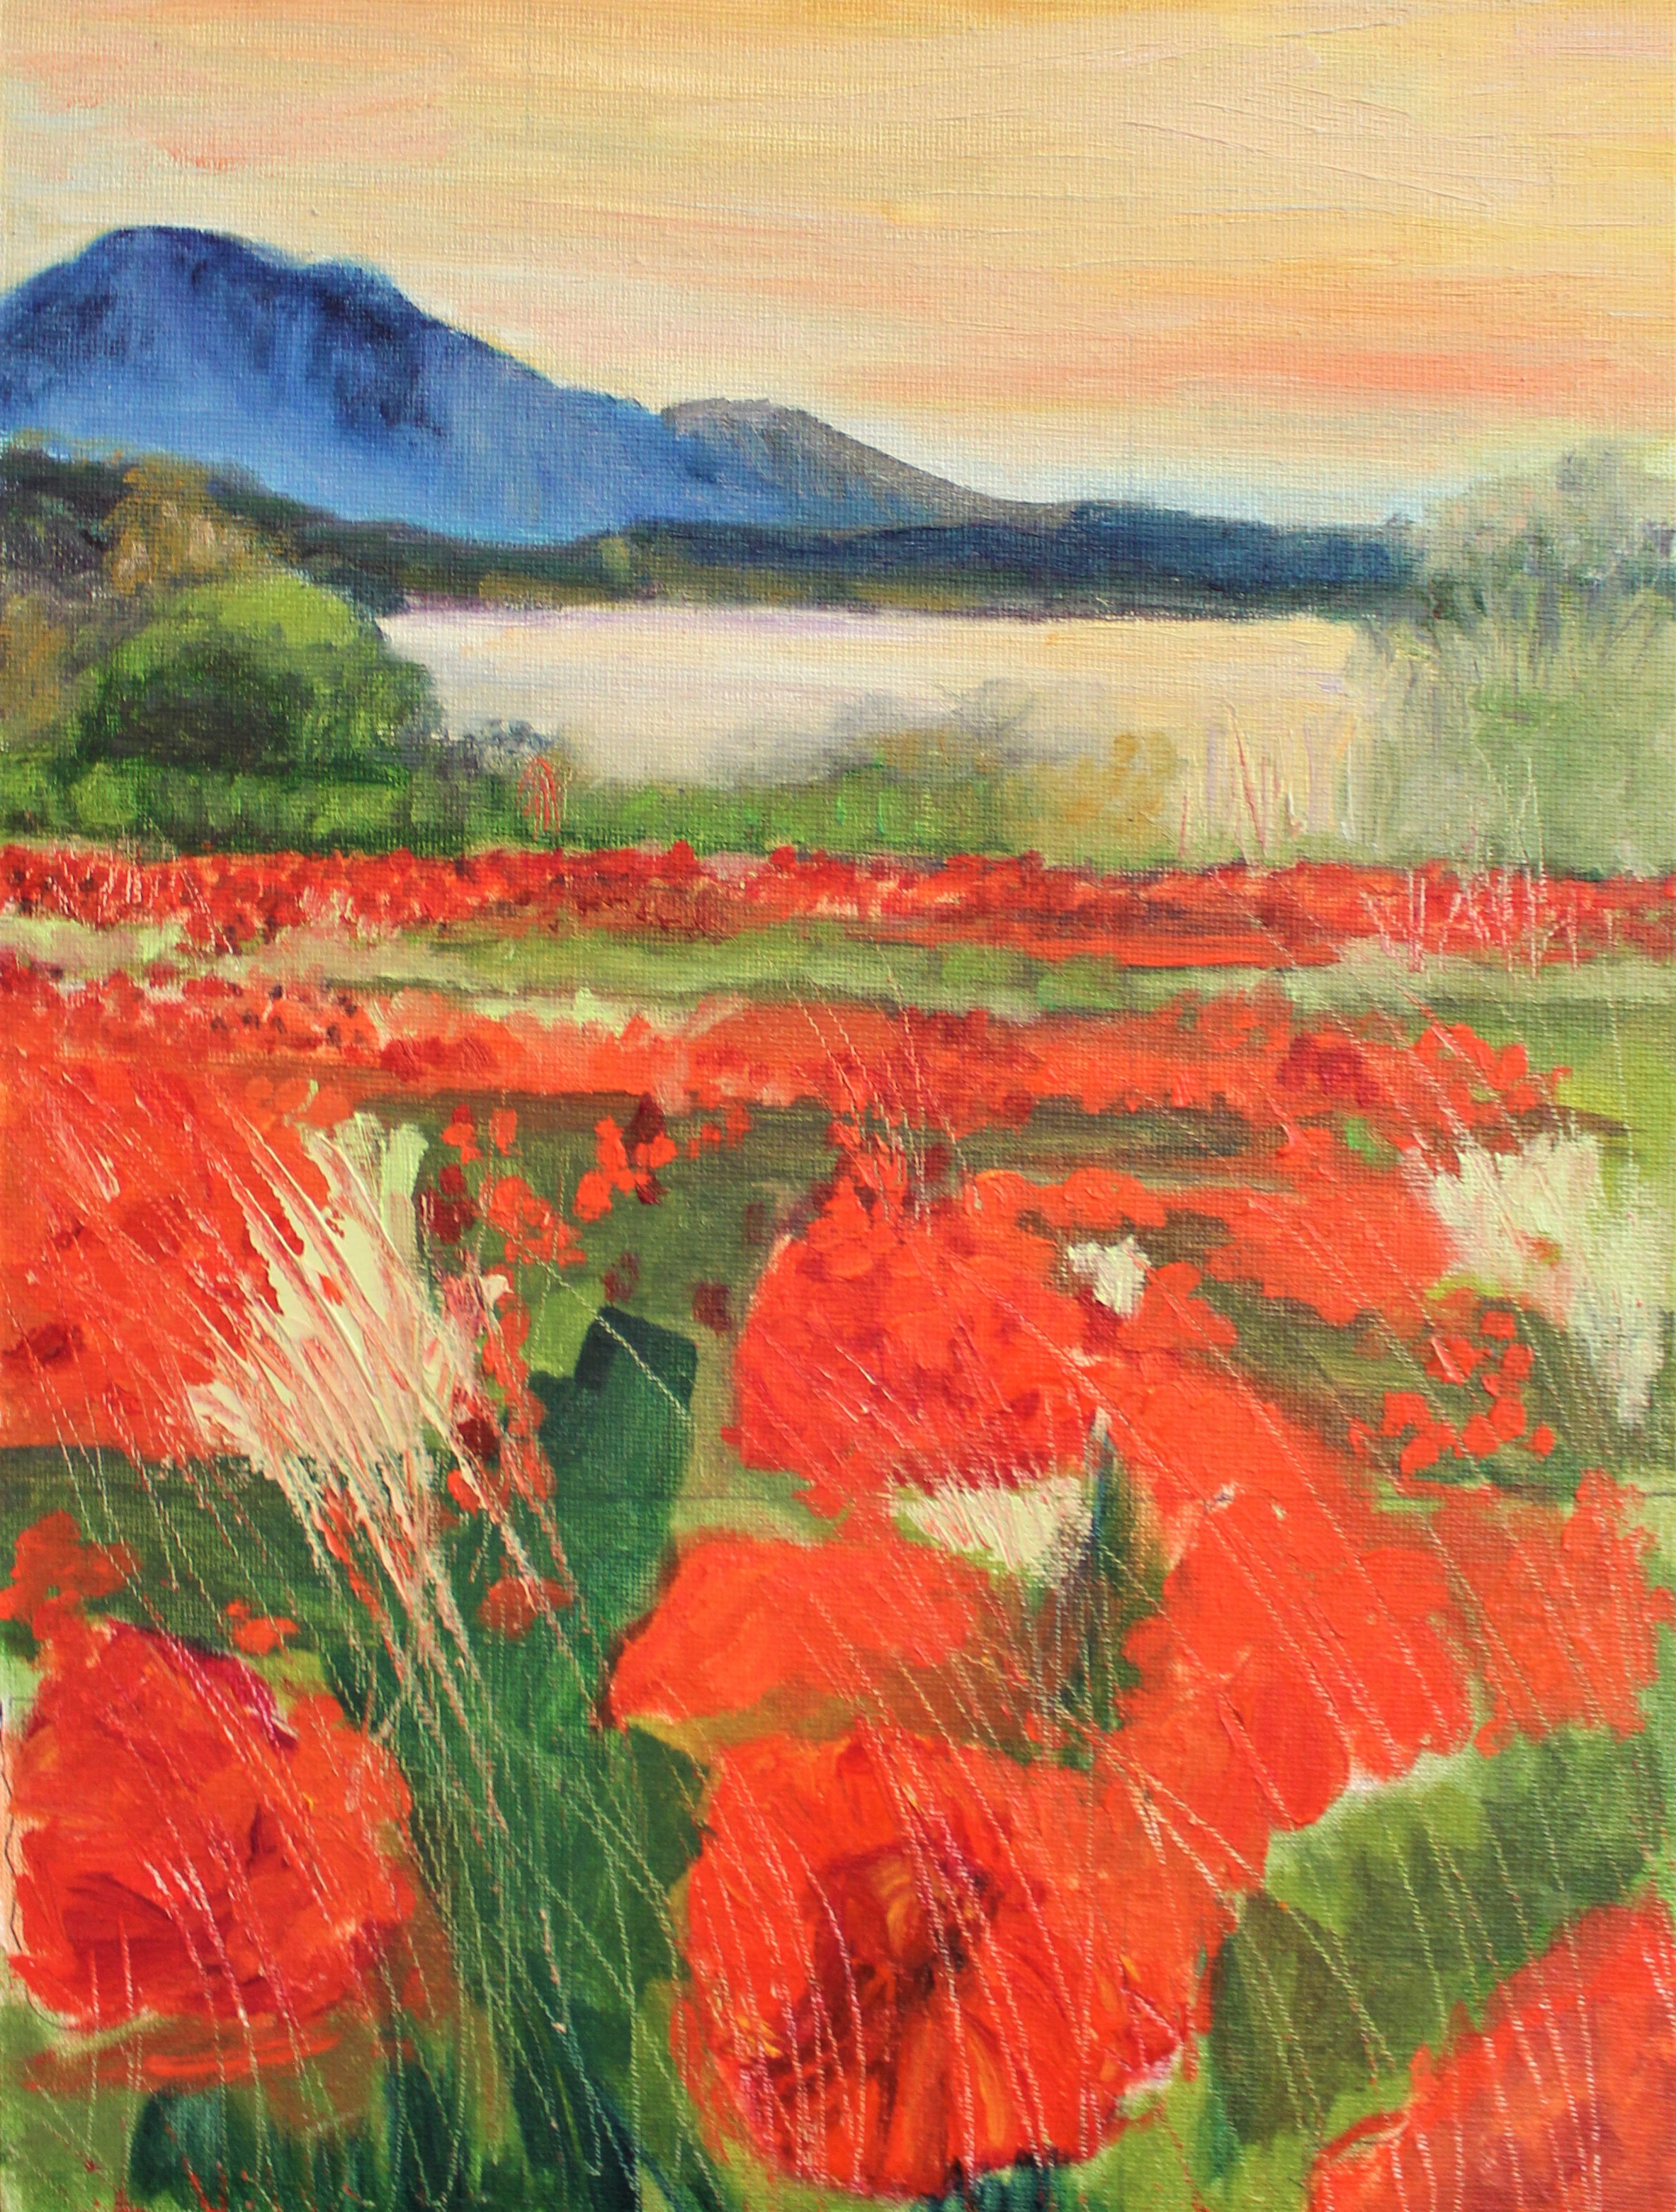 A Study of Poppies